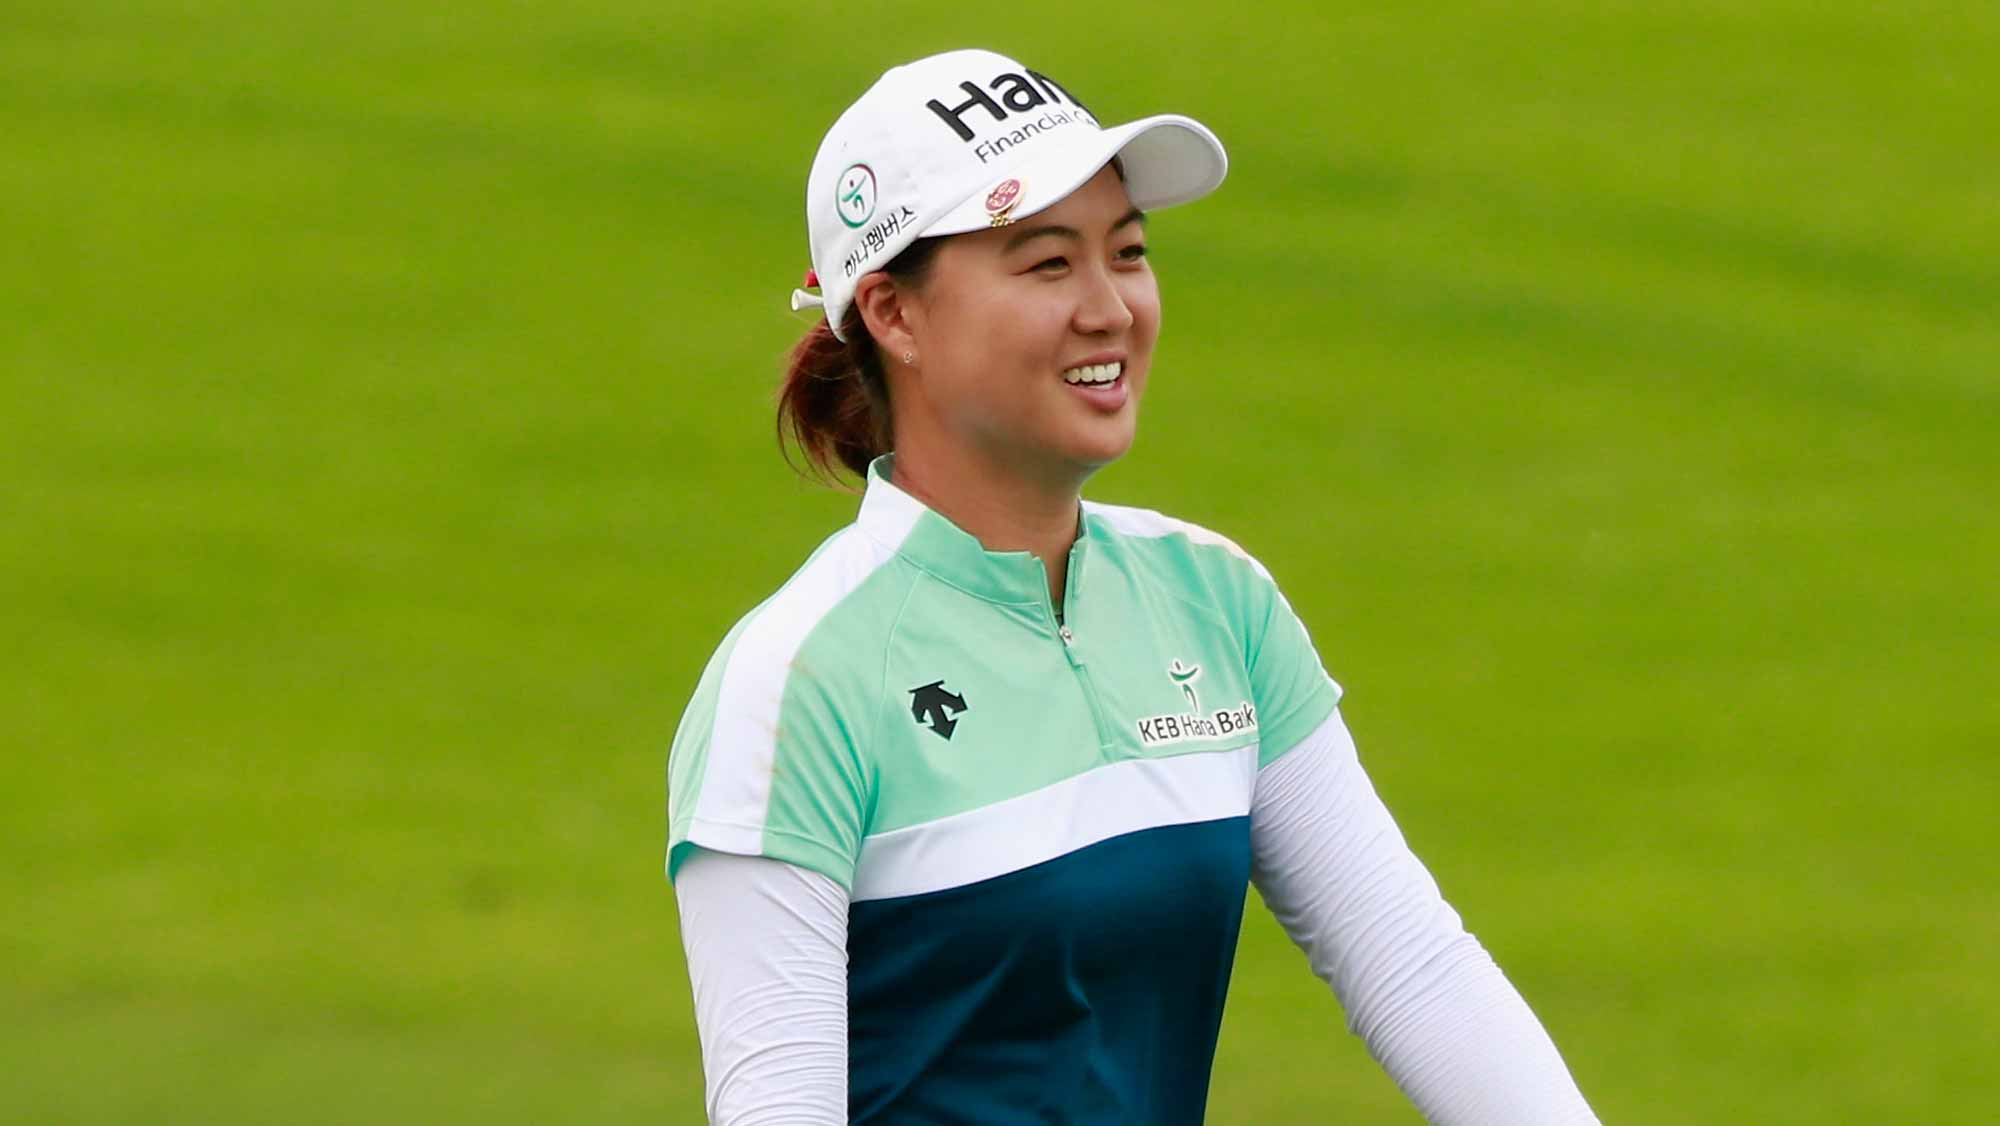 Minjee Lee of Australia reacts on the field at the 18th hole during Round 2 of Blue Bay LPGA